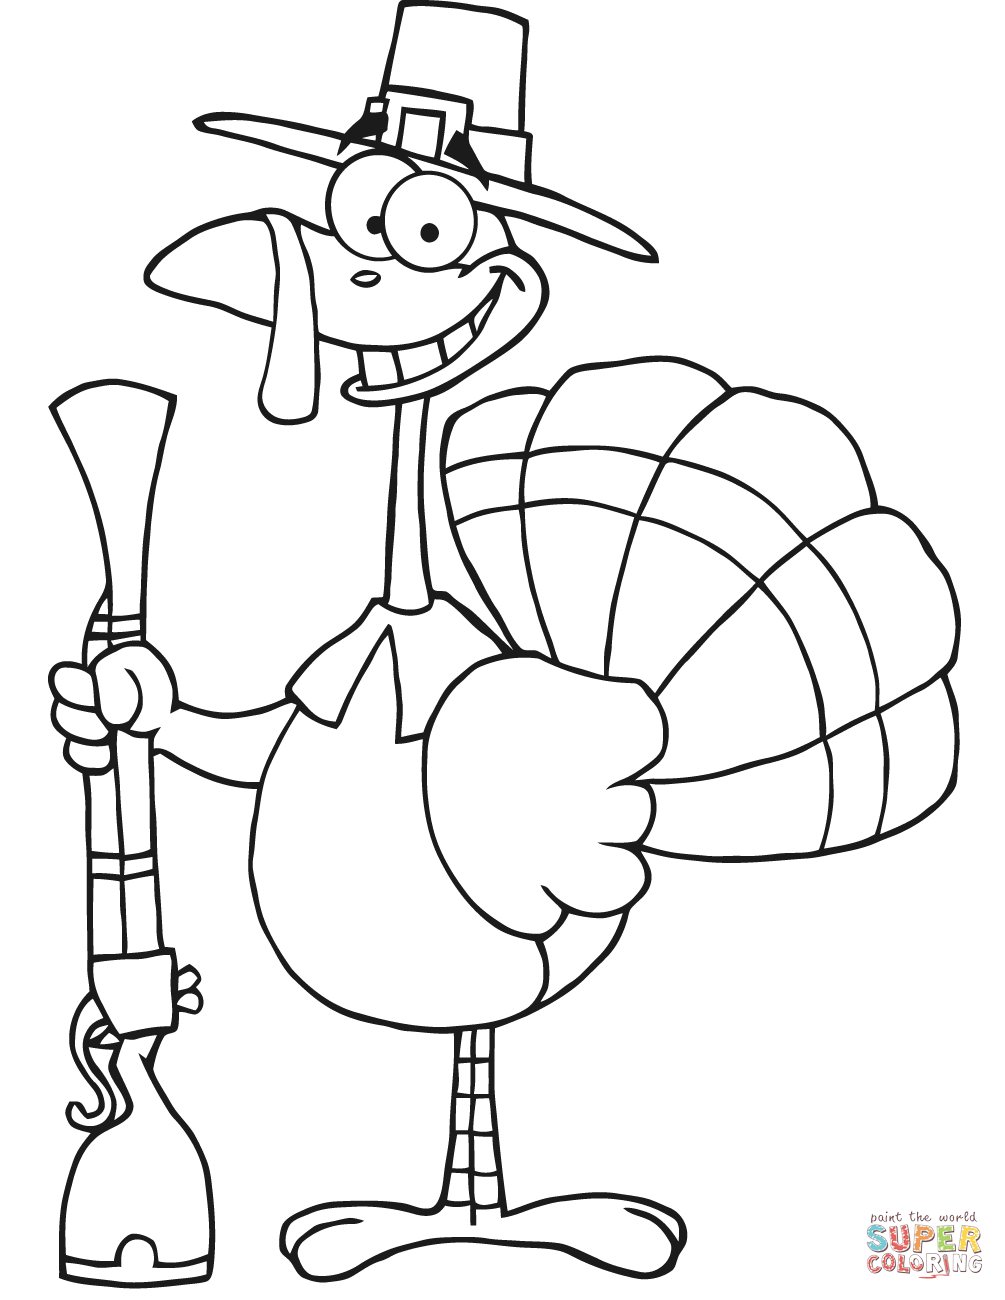 Happy turkey with pilgrim hat and musket